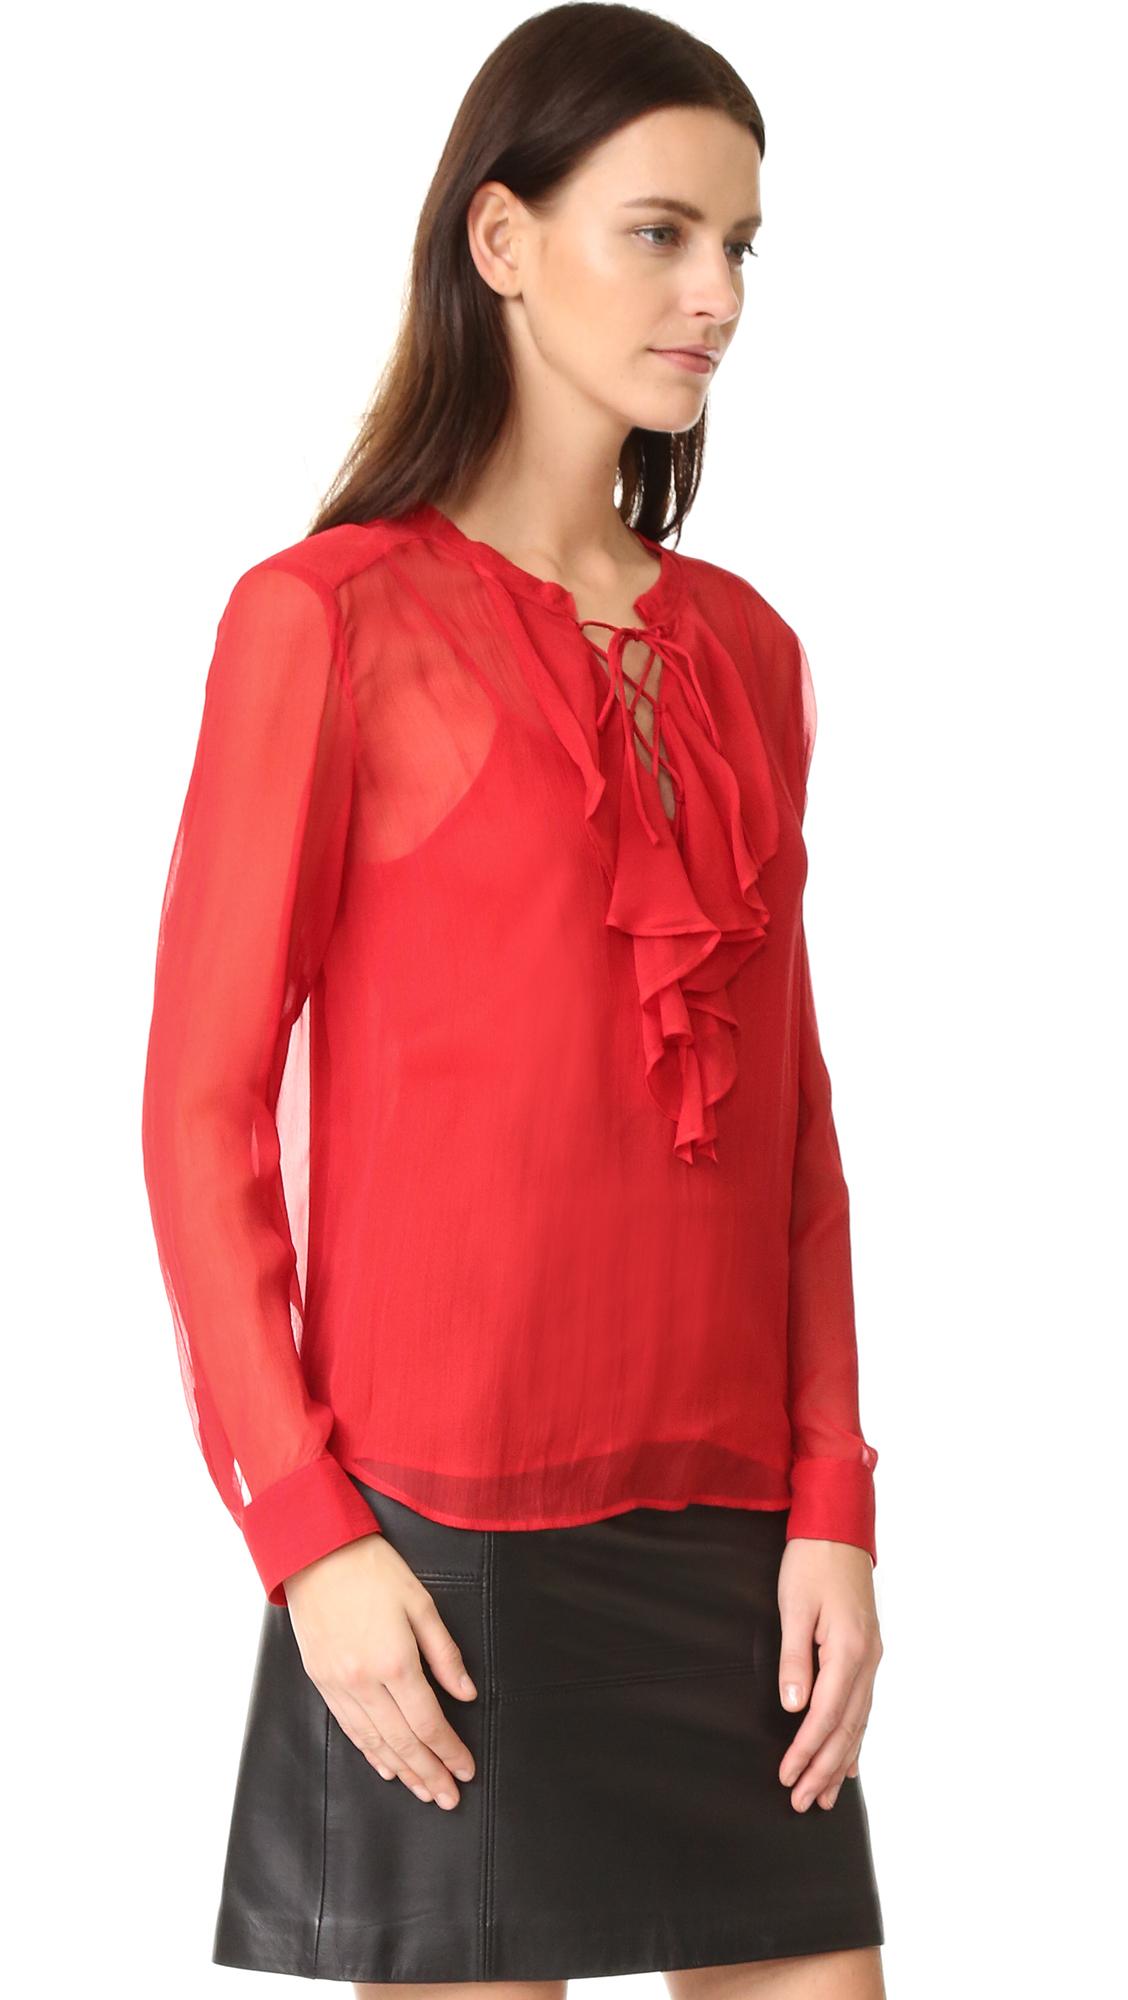 Lyst - The Kooples Ruffle Front Blouse in Red